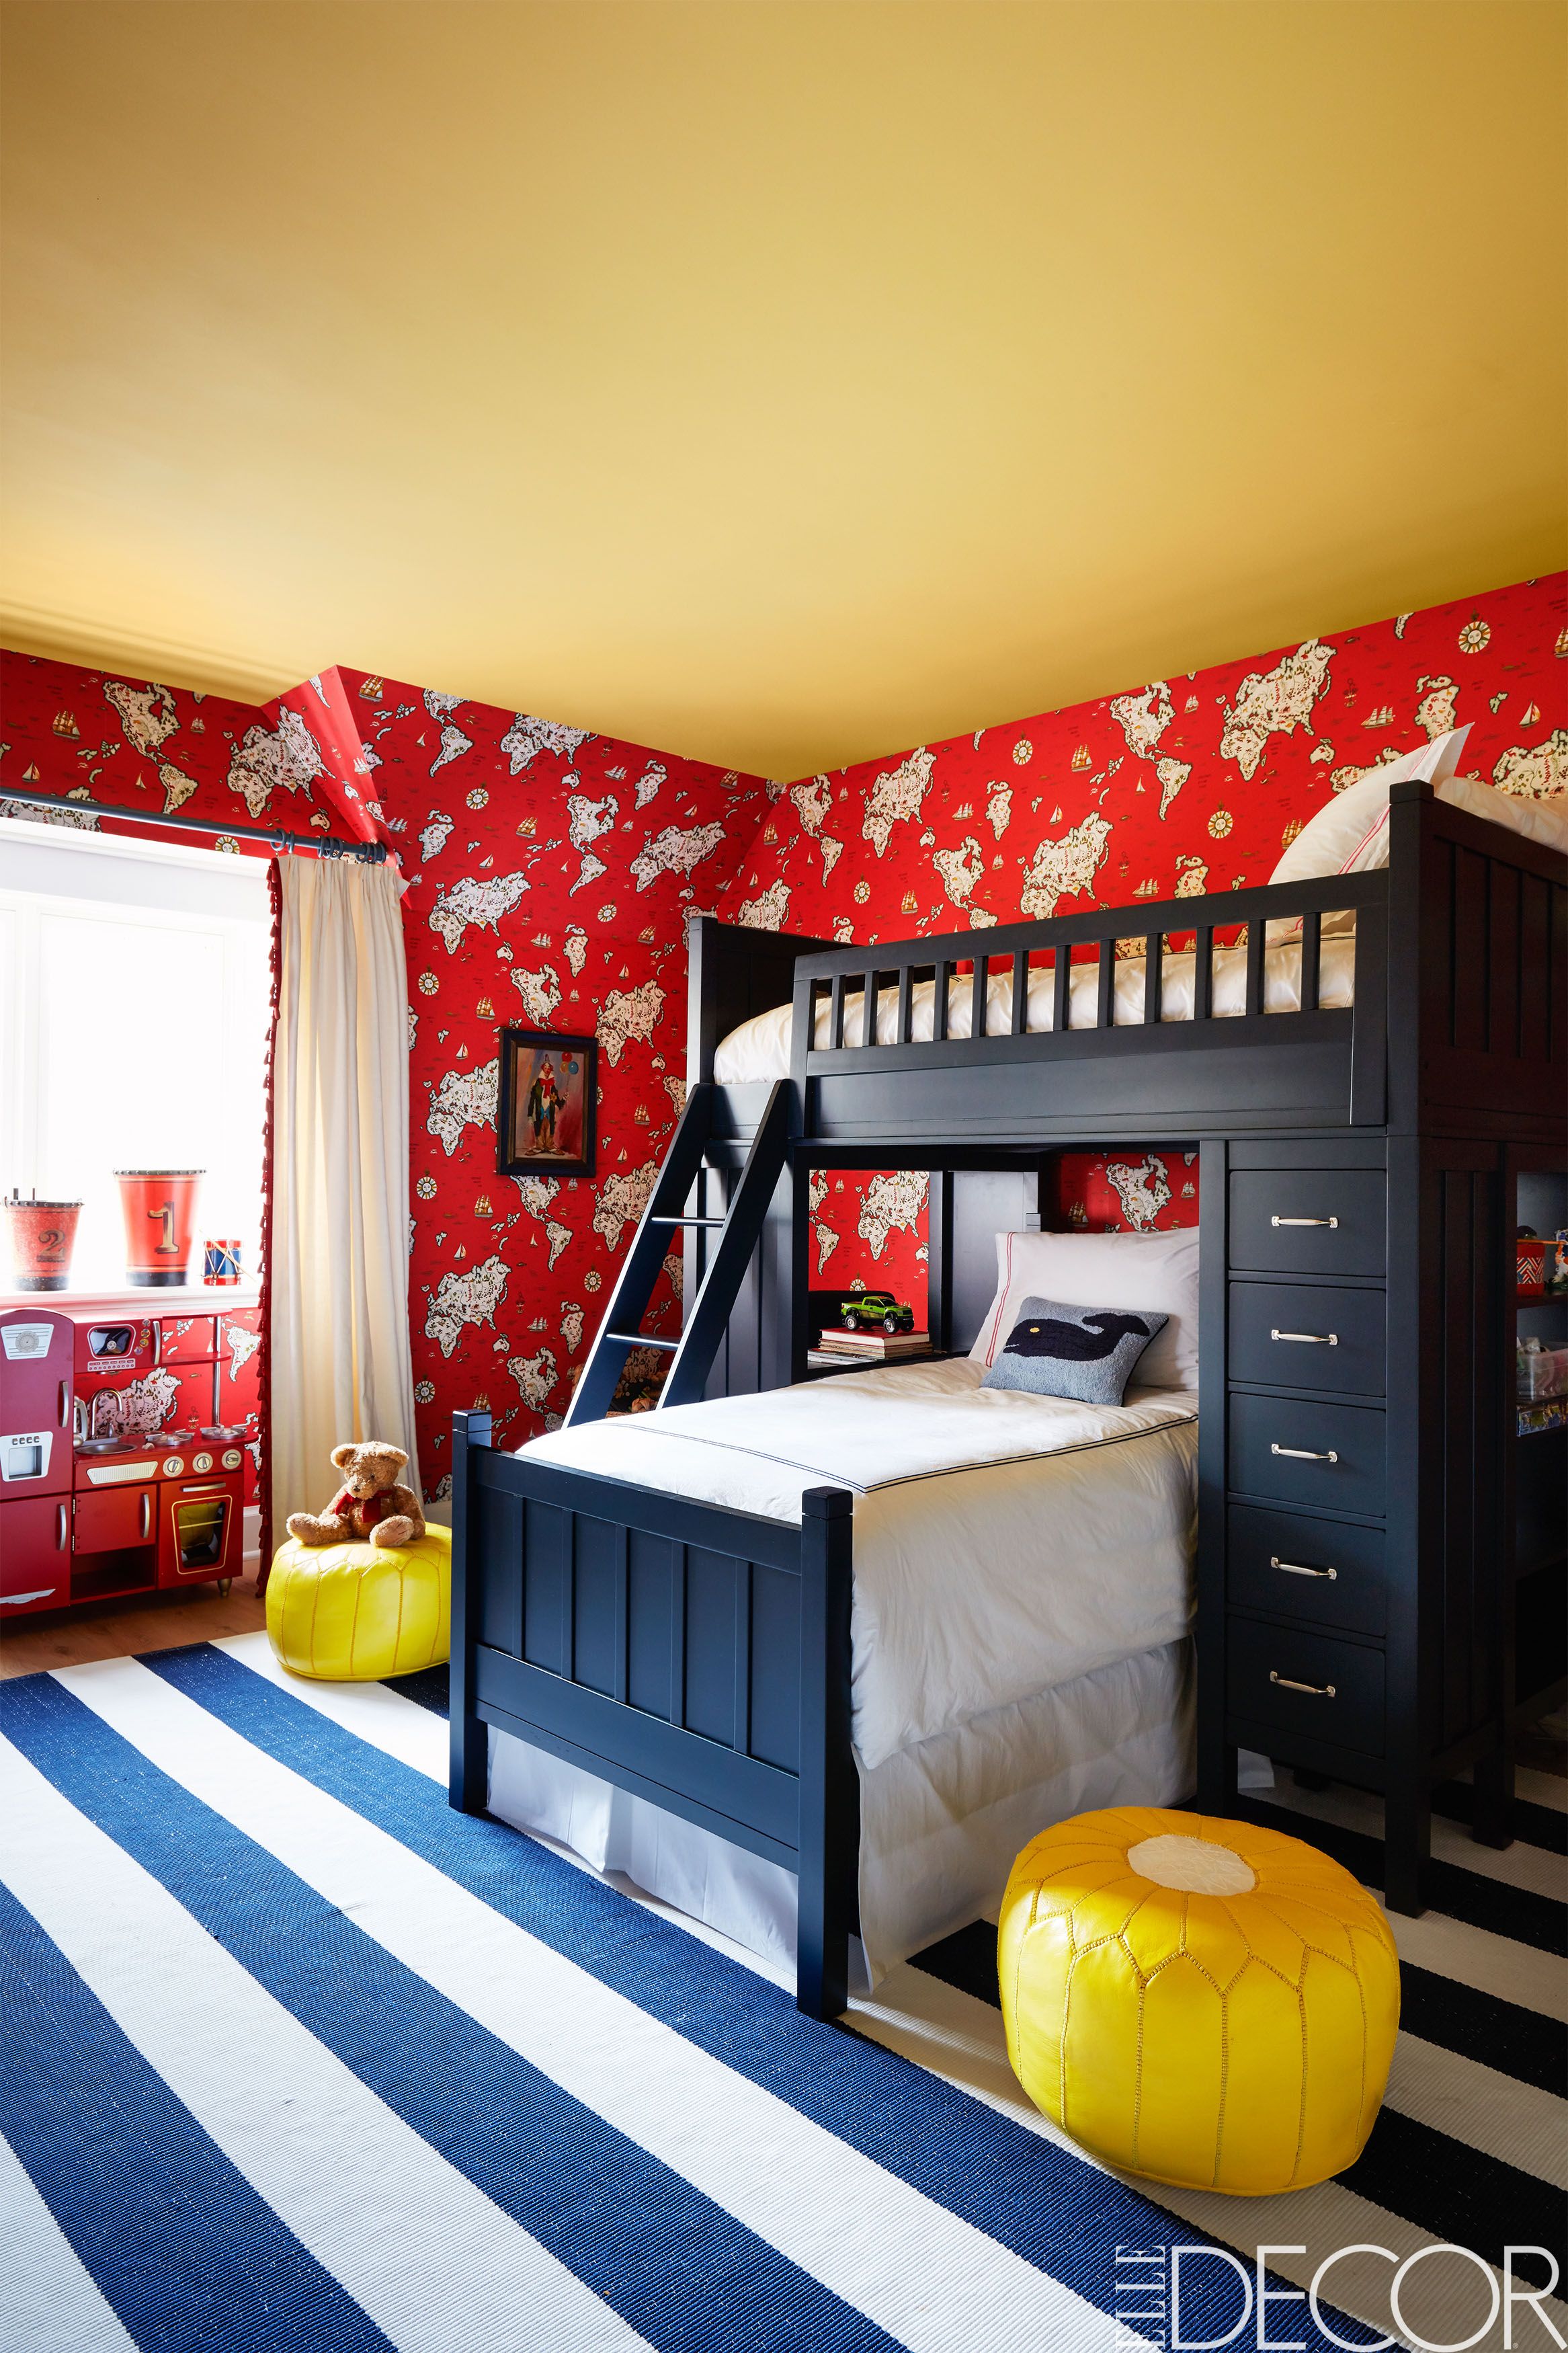 26 Sophisticated Boys Room Ideas How To Decorate A Boys Bedroom